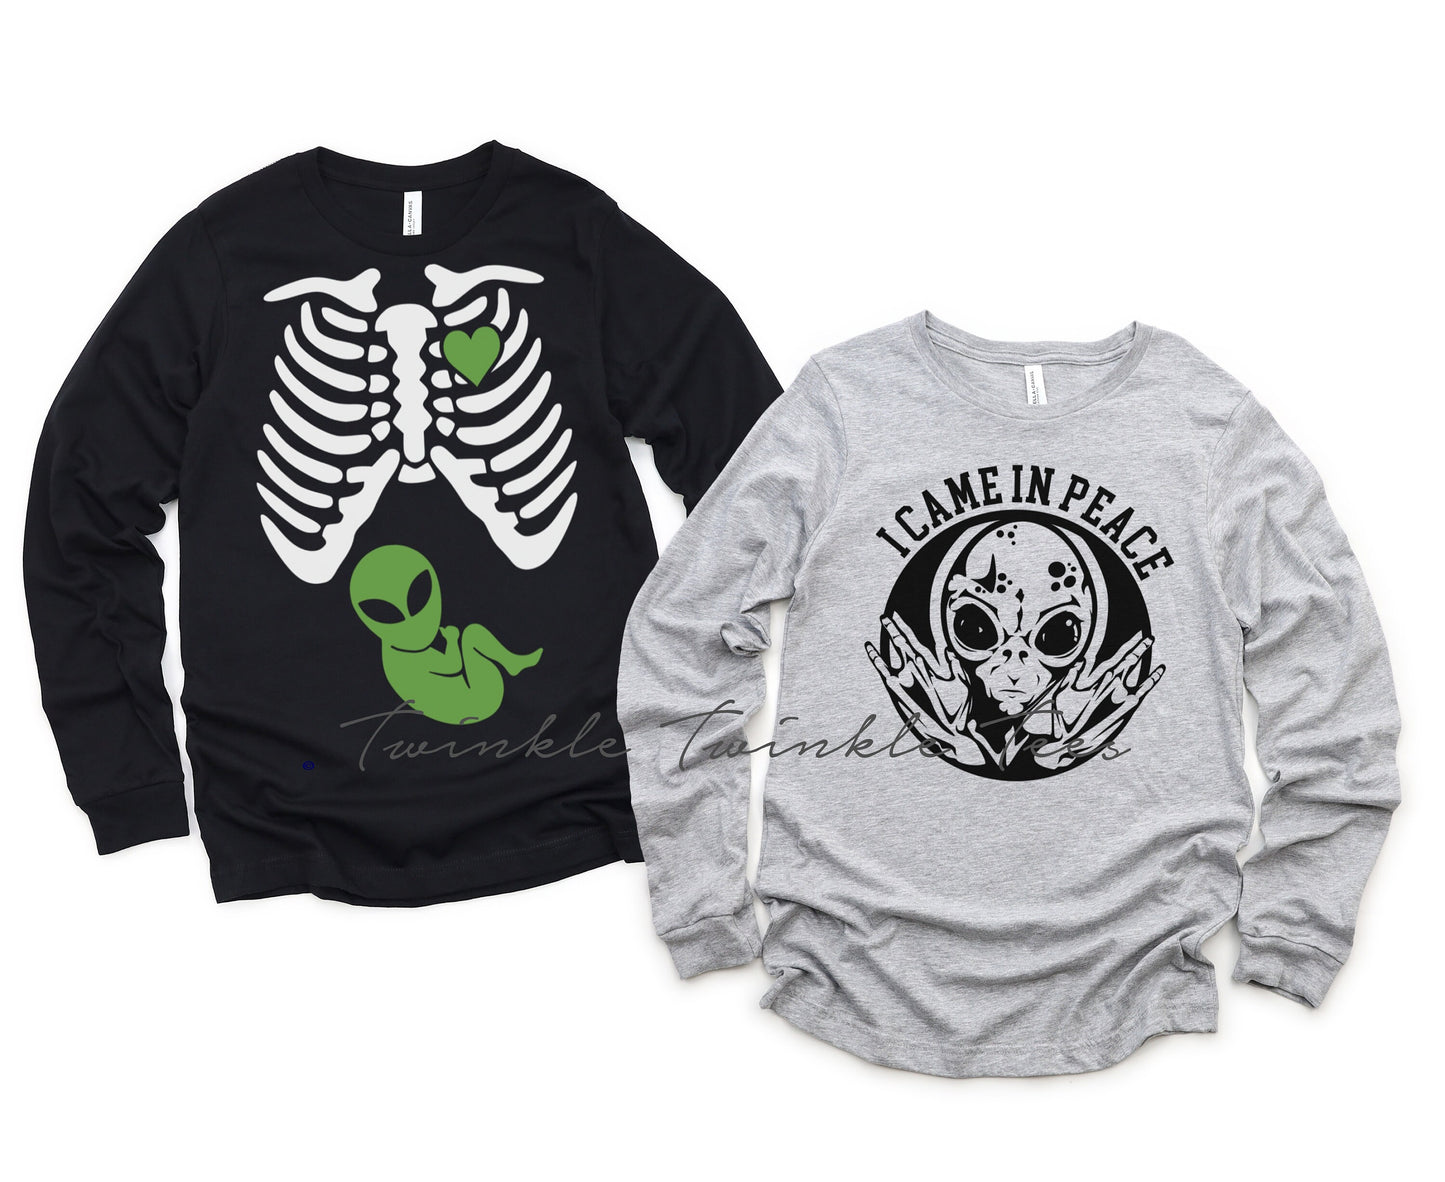 Alien Skeleton Maternity long sleeve or short sleeve t-shirt - nerdy pregnancy shirt - nerdy pregnancy announcement - dad options too